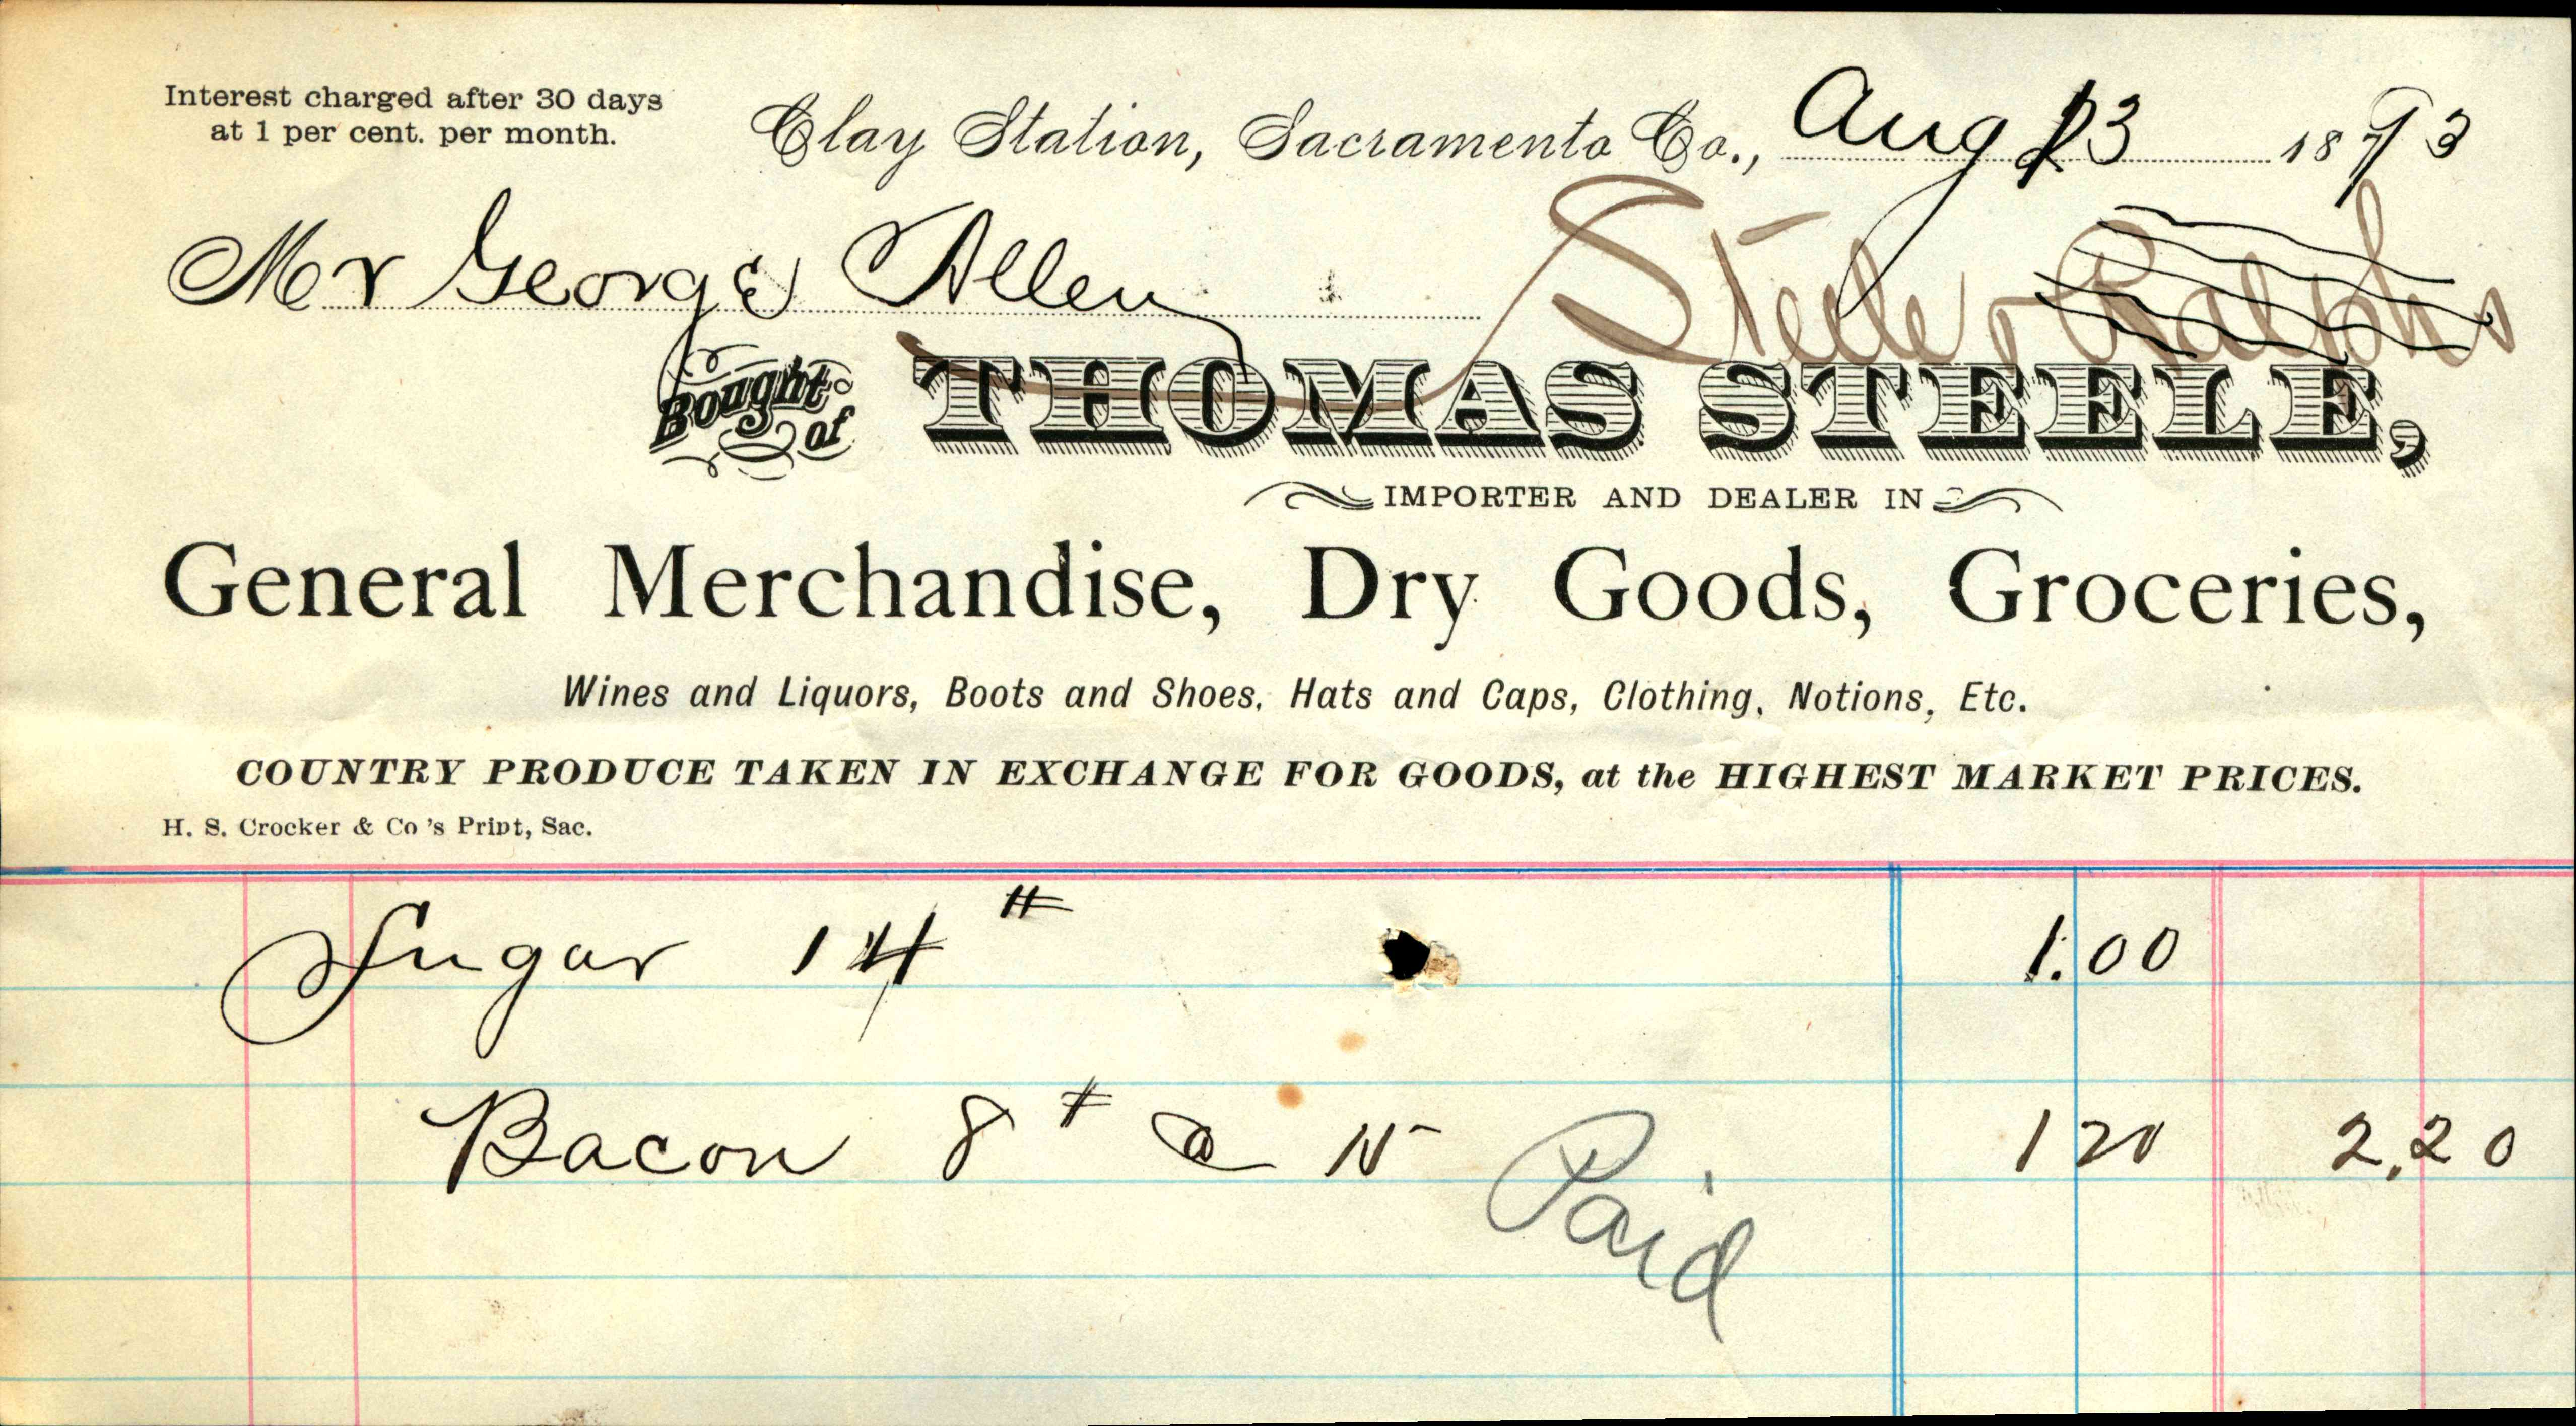 Receipt for Dry Goods, groceries